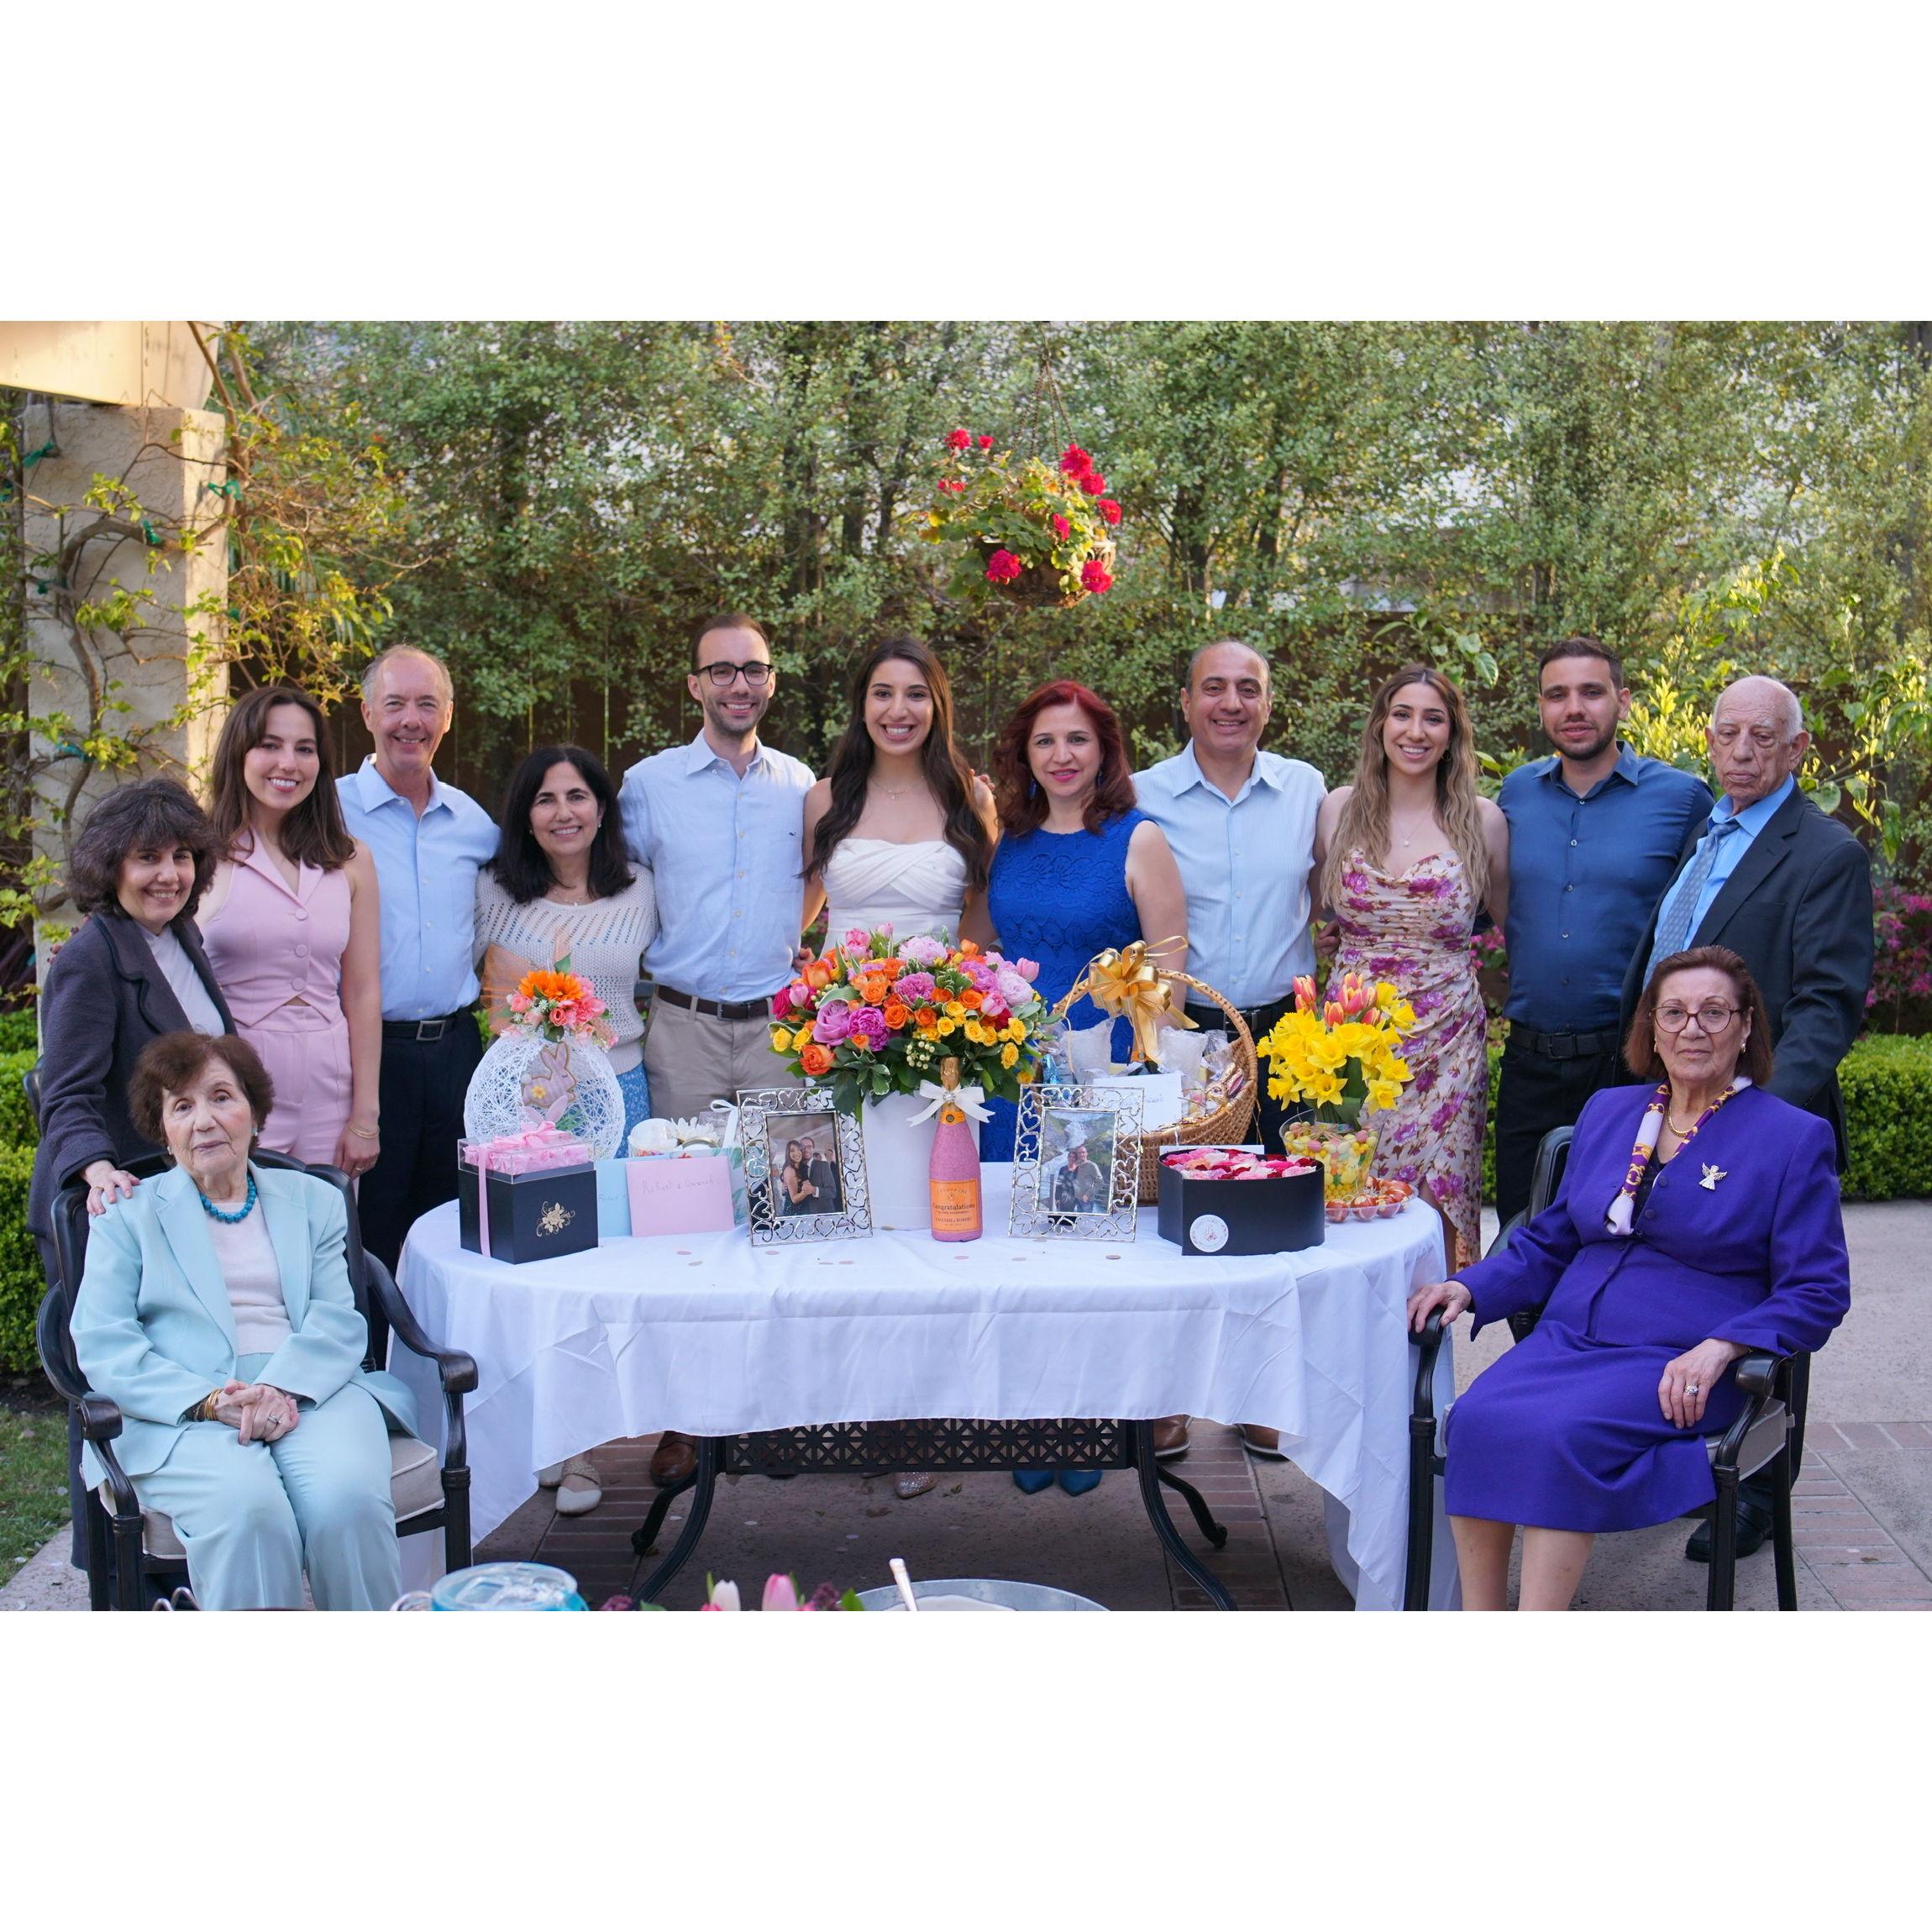 Our families at the surprise proposal party